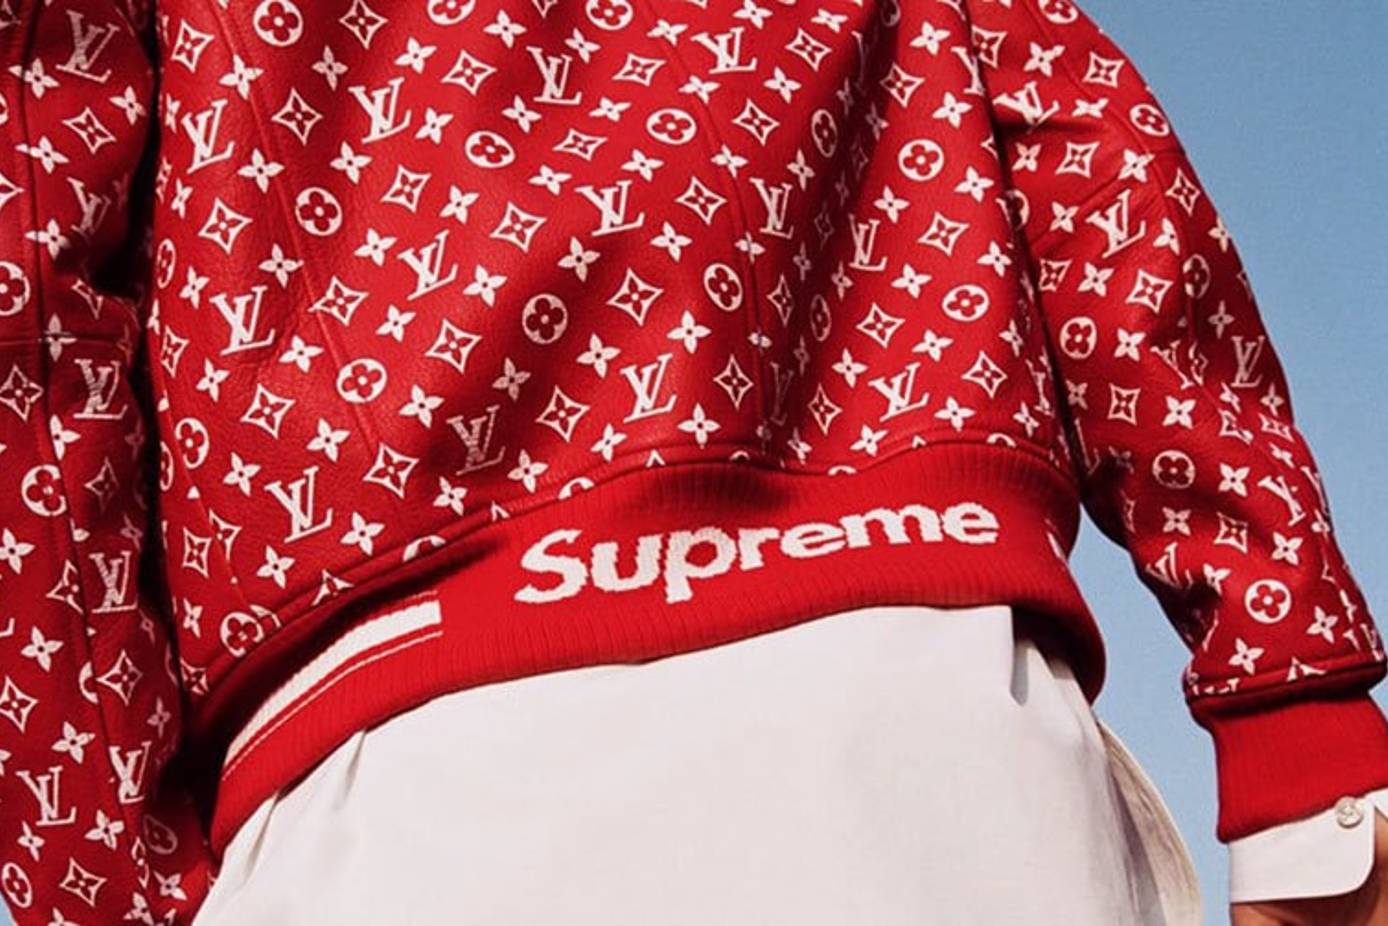 A Louis Vuitton and Supreme jacket